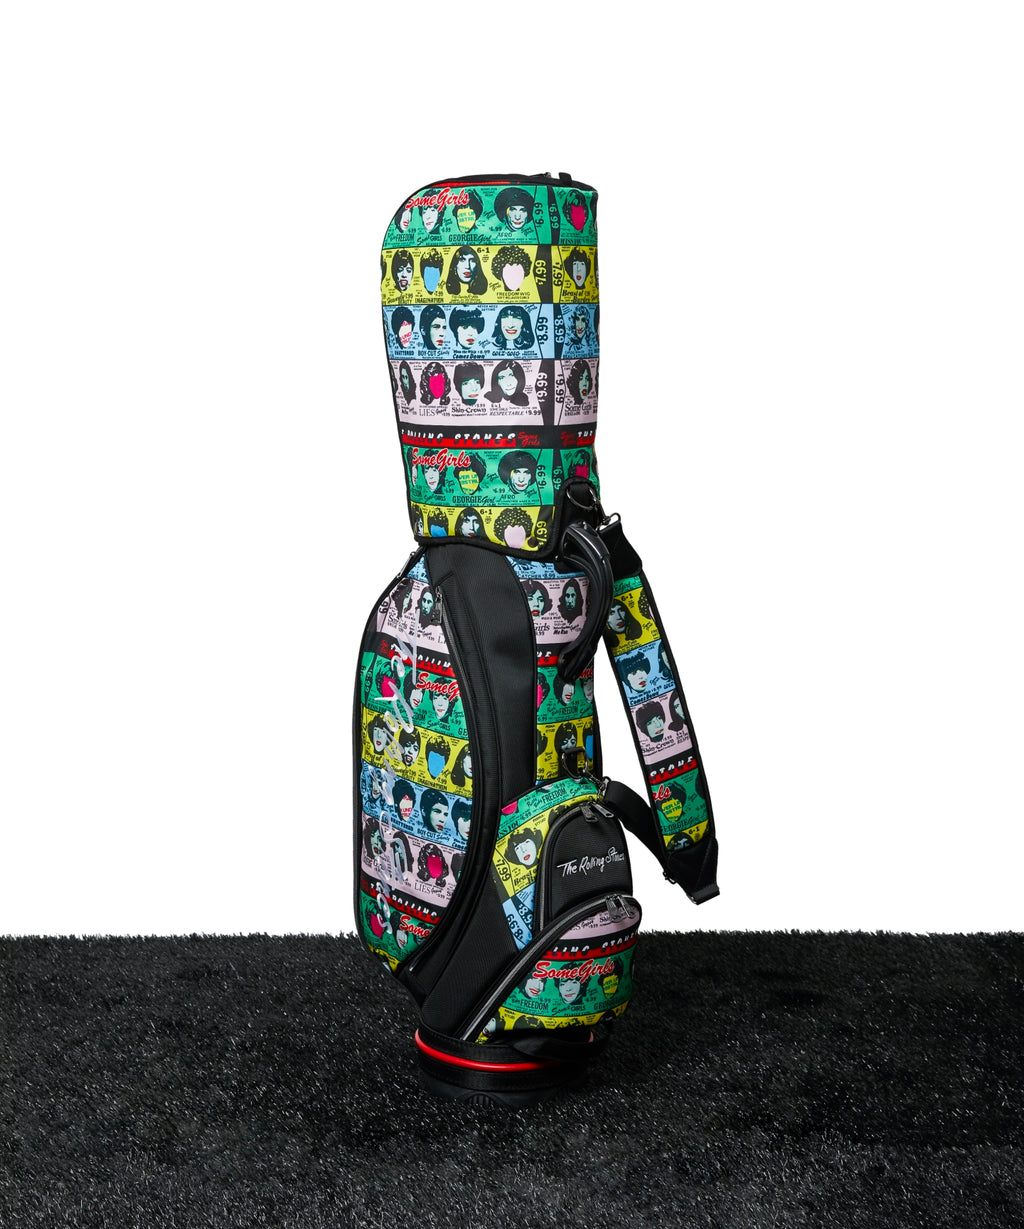 【The Rolling Stones】RollingStones Some Girls Tour Golf Bag